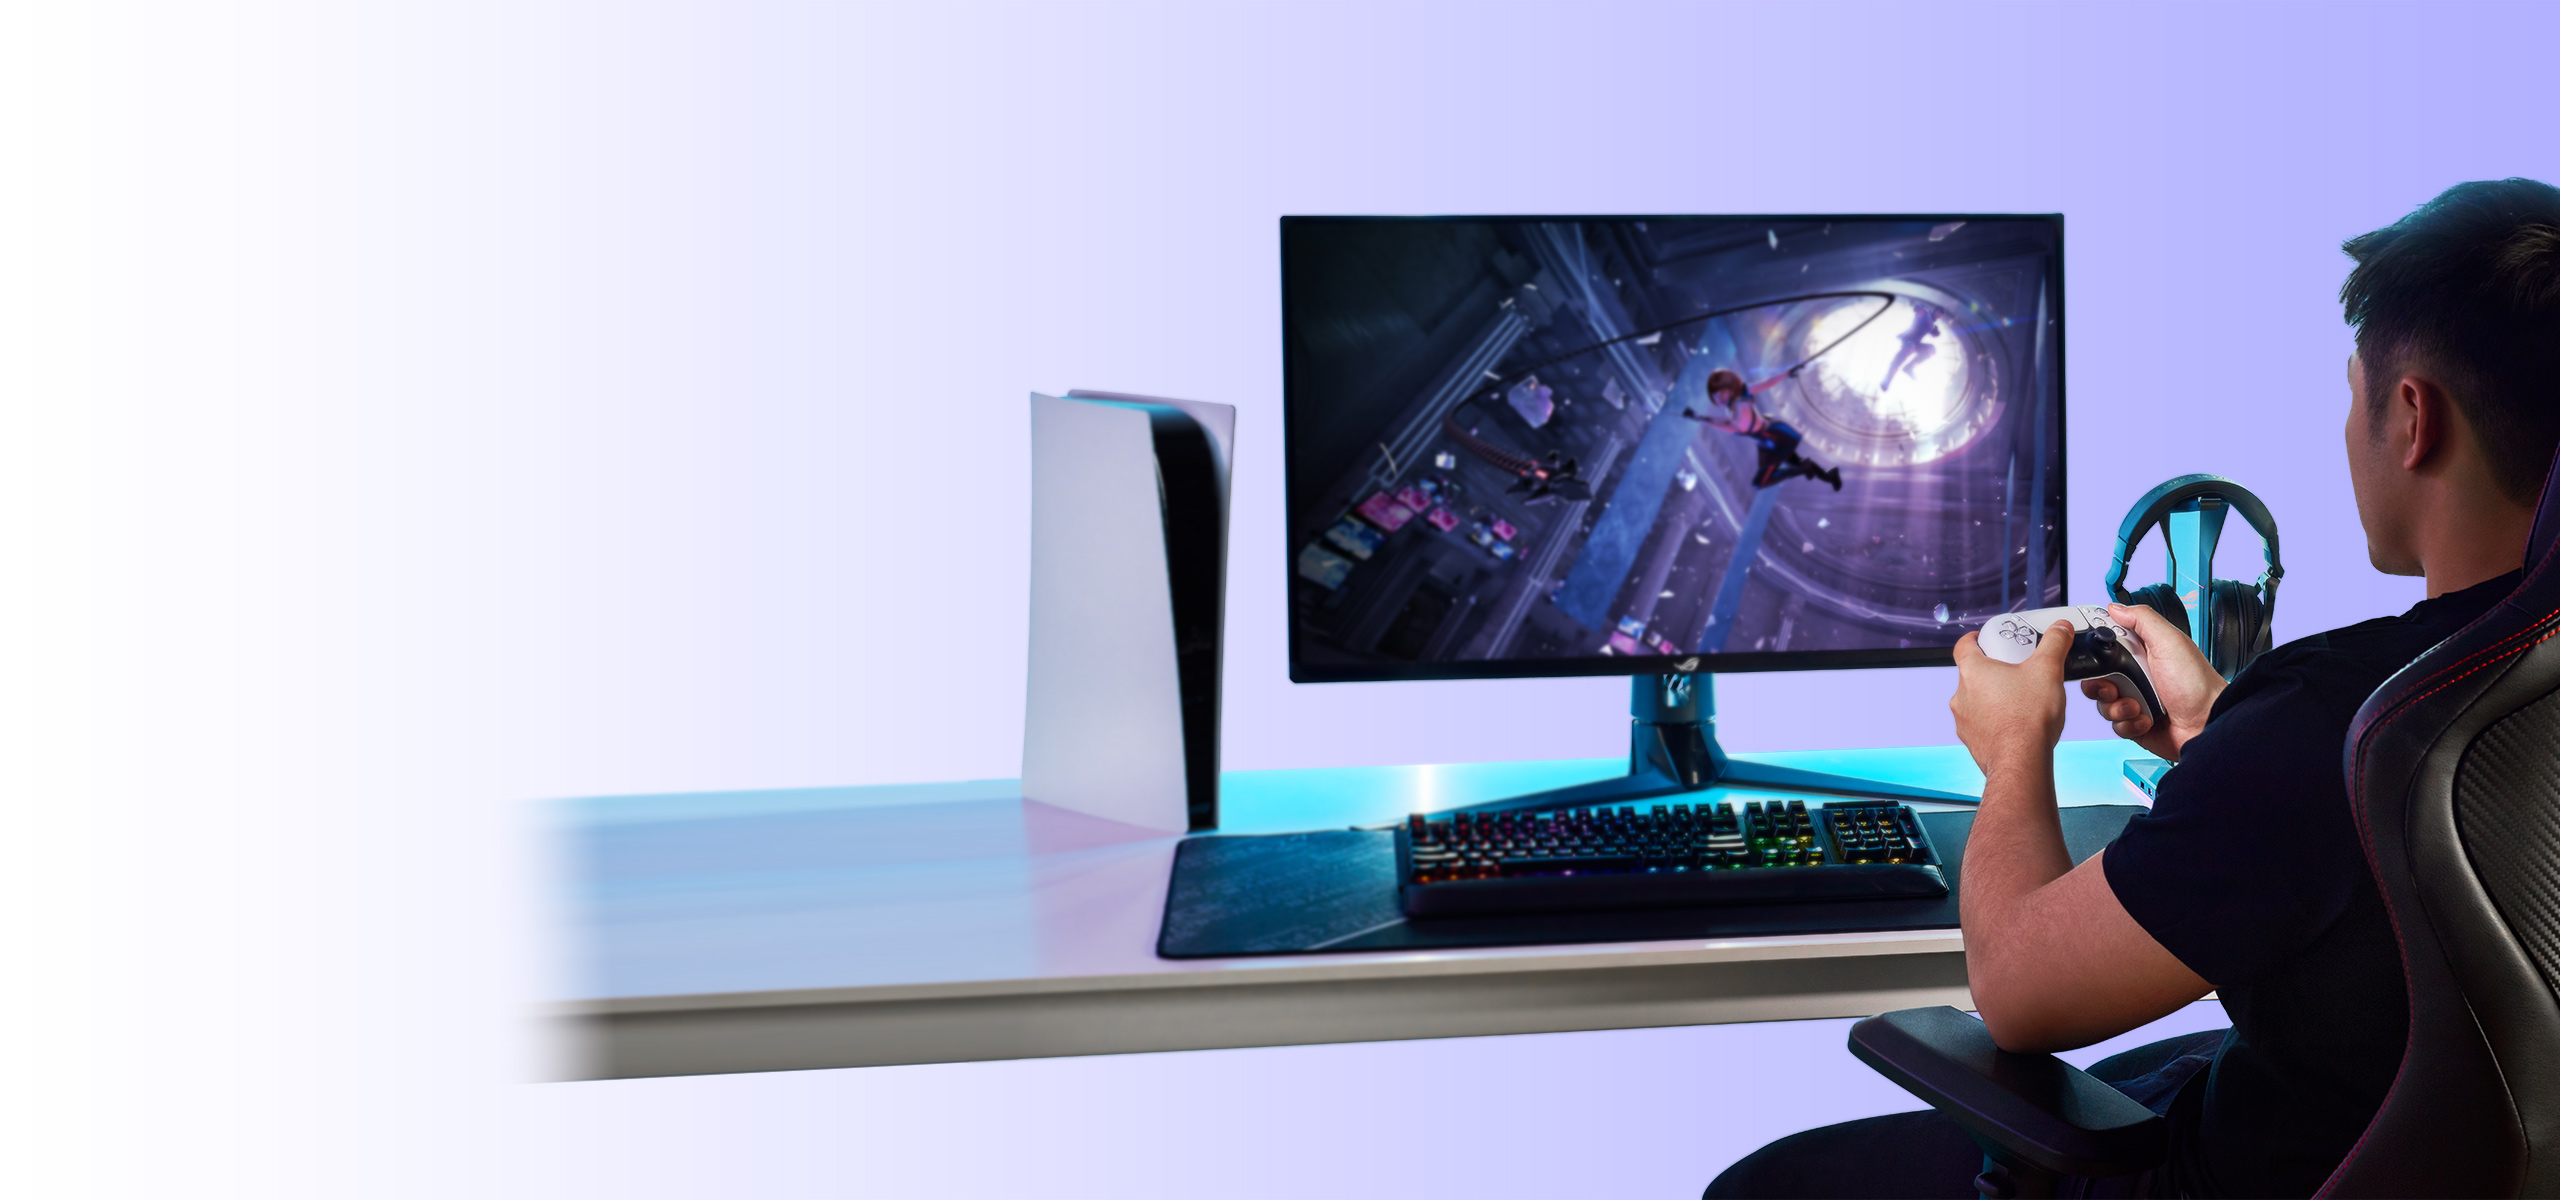 A man plays console game using ASUS gaming monitor.